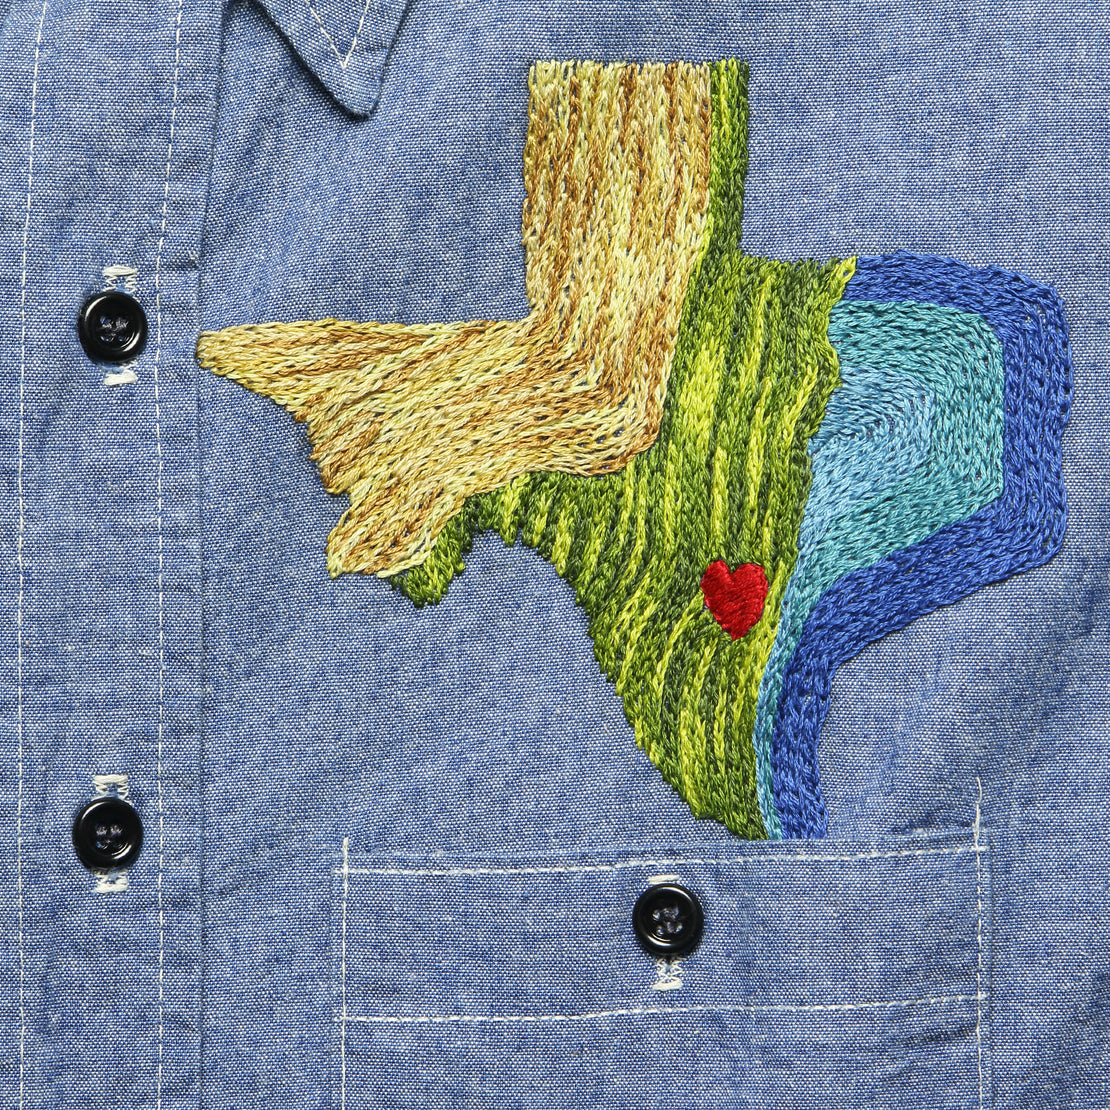 Embroidered Chambray Shirt - The Stars at Night - Jolly Knot Club - STAG Provisions - One & Done - Apparel